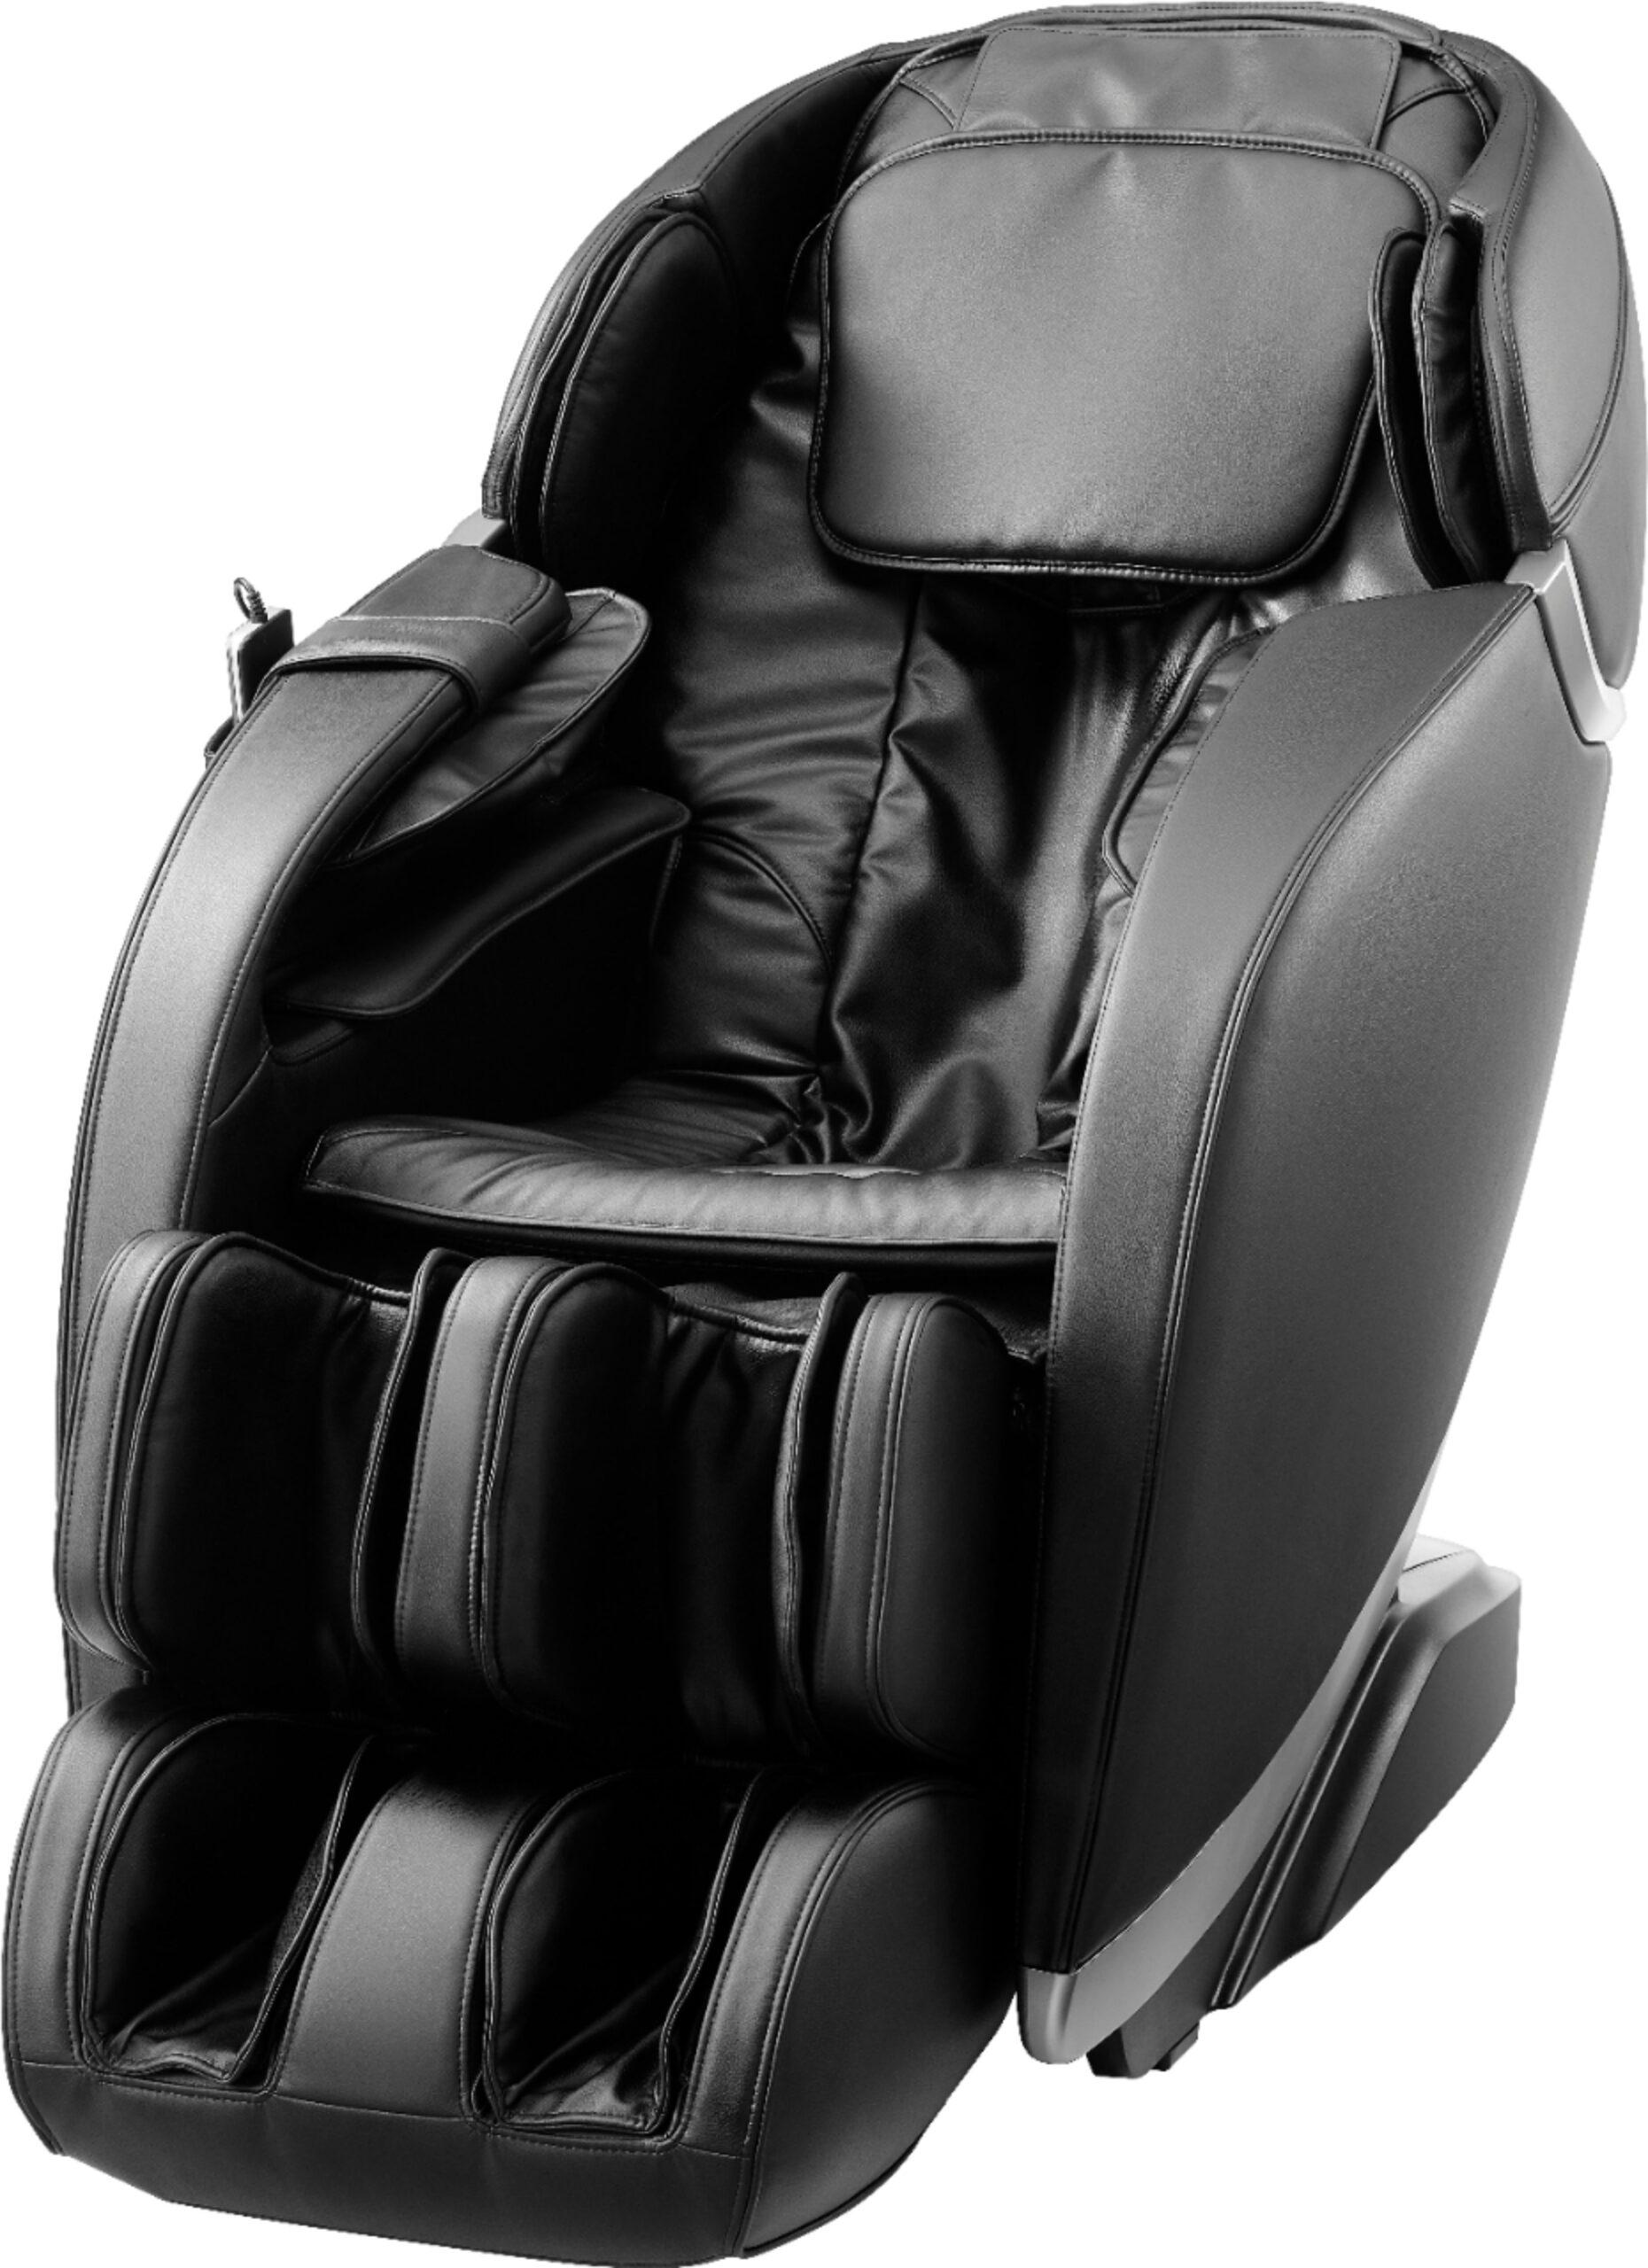 This deal won't last! $1,500 off Insignia's Zero Gravity Massage Chair. b7f9a2b3 6405497cv17d scaled